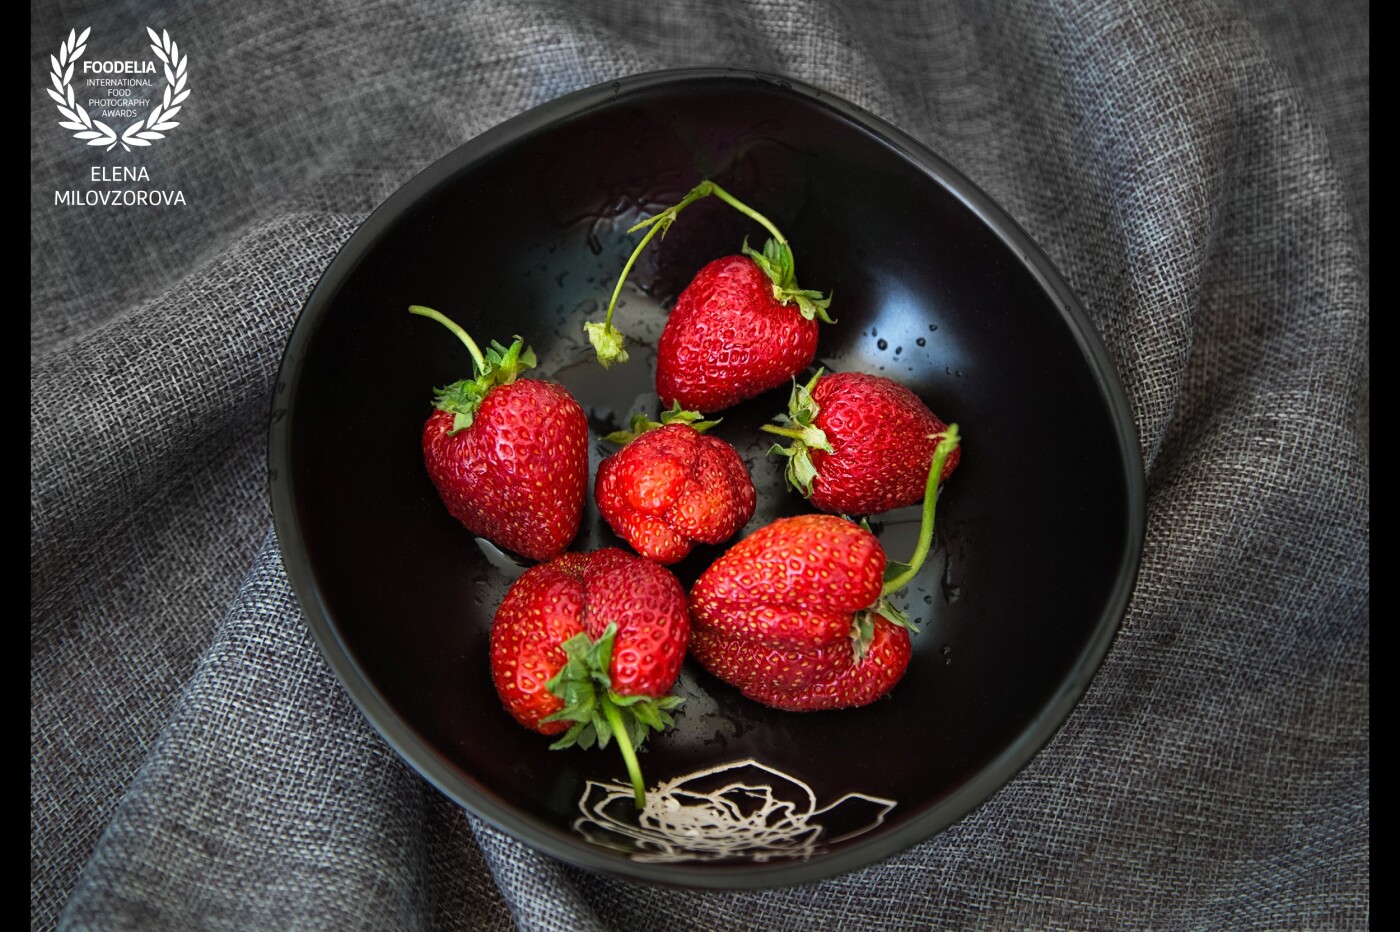 I like the strawberry. It's delicious. Juicy, sweet, aromatic. It always gives a feeling of freshness and spring. I want to convey this in the photo.